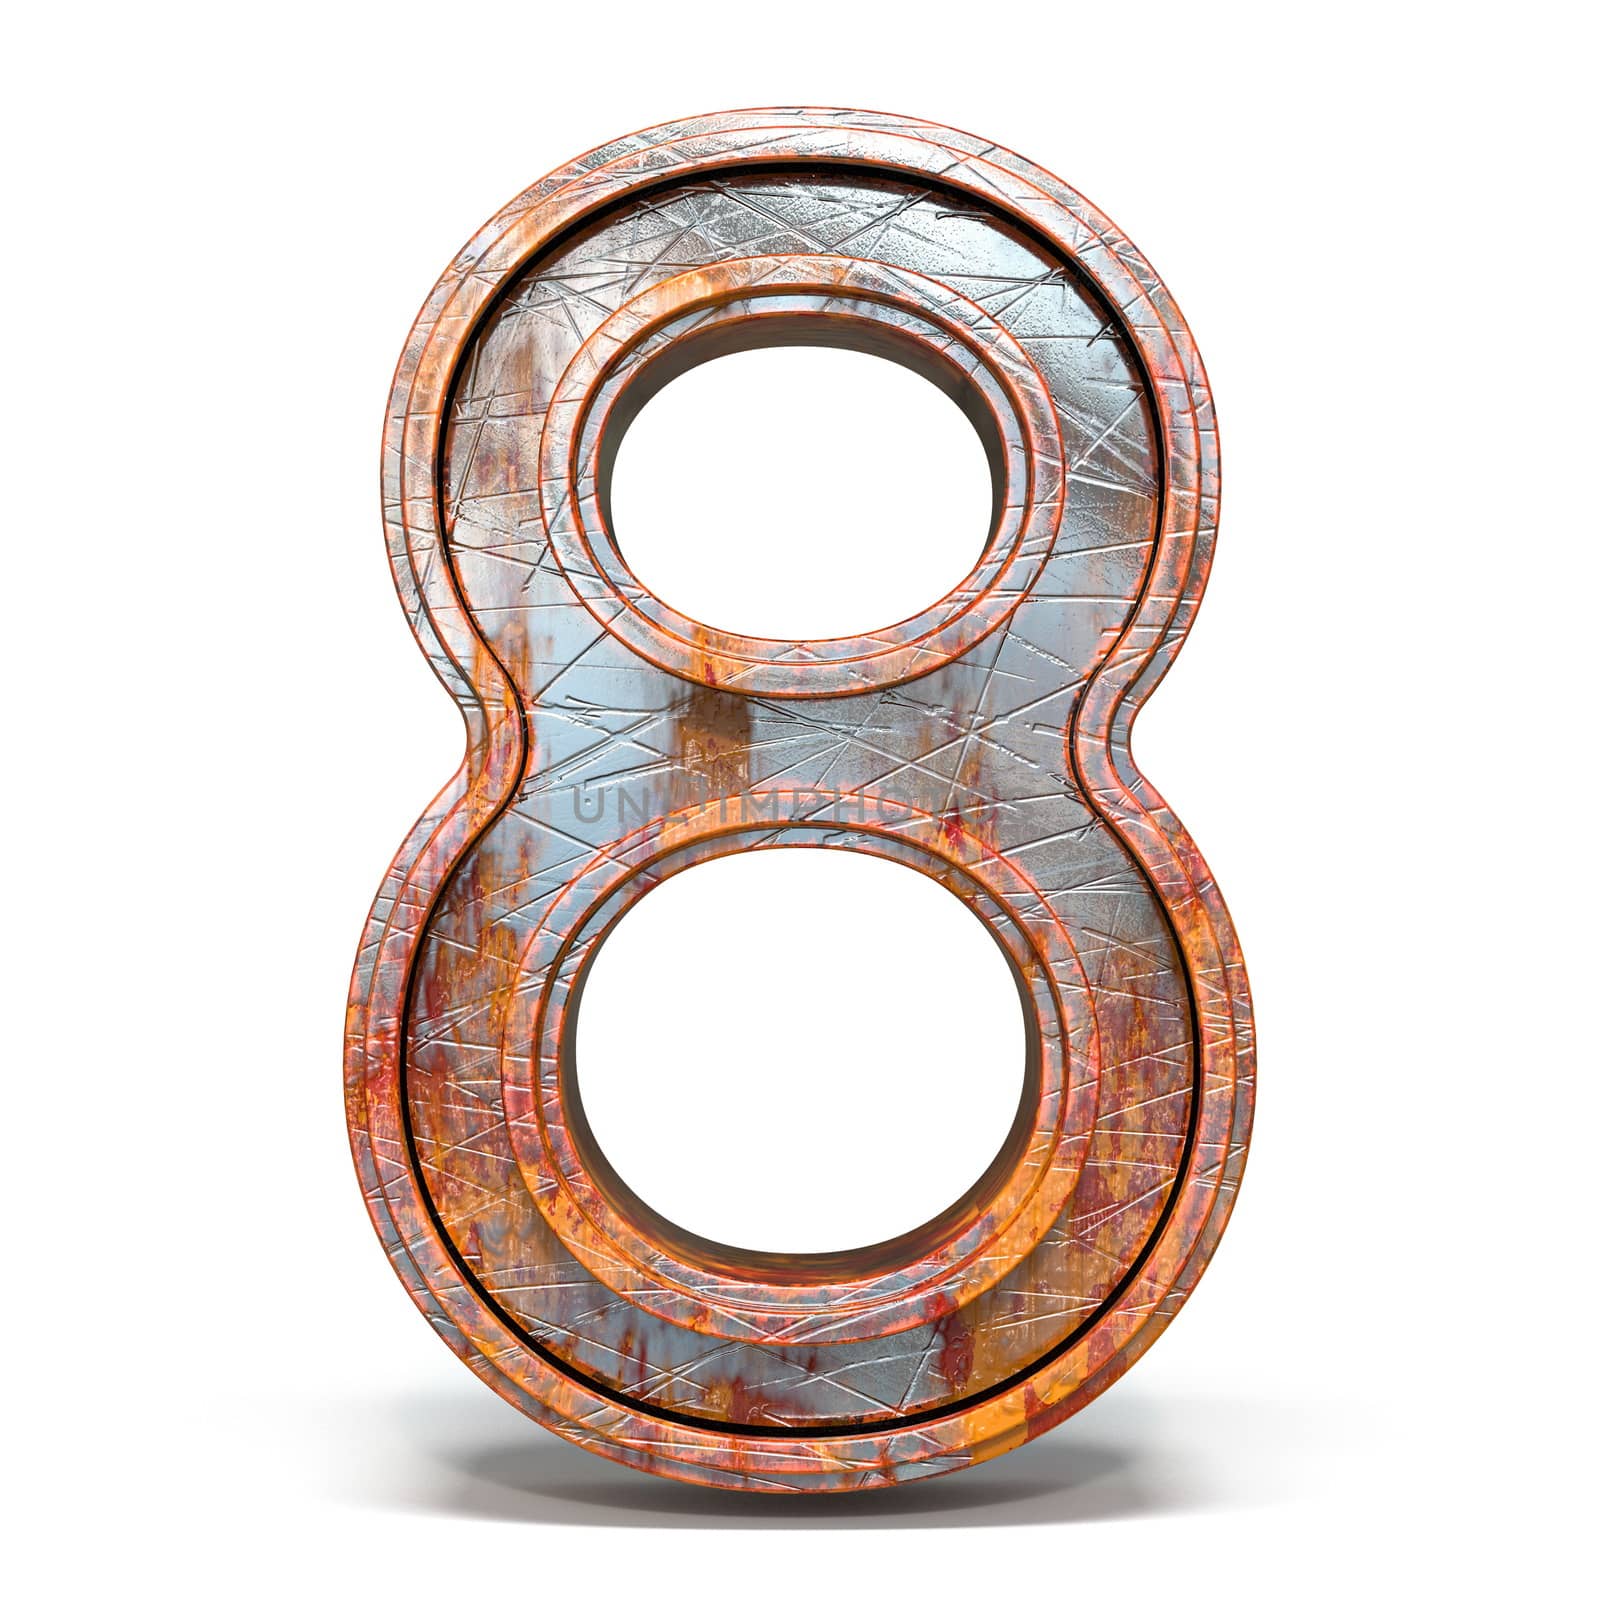 Rusty metal font Number 8 EIGHT 3D render illustration isolated on white background